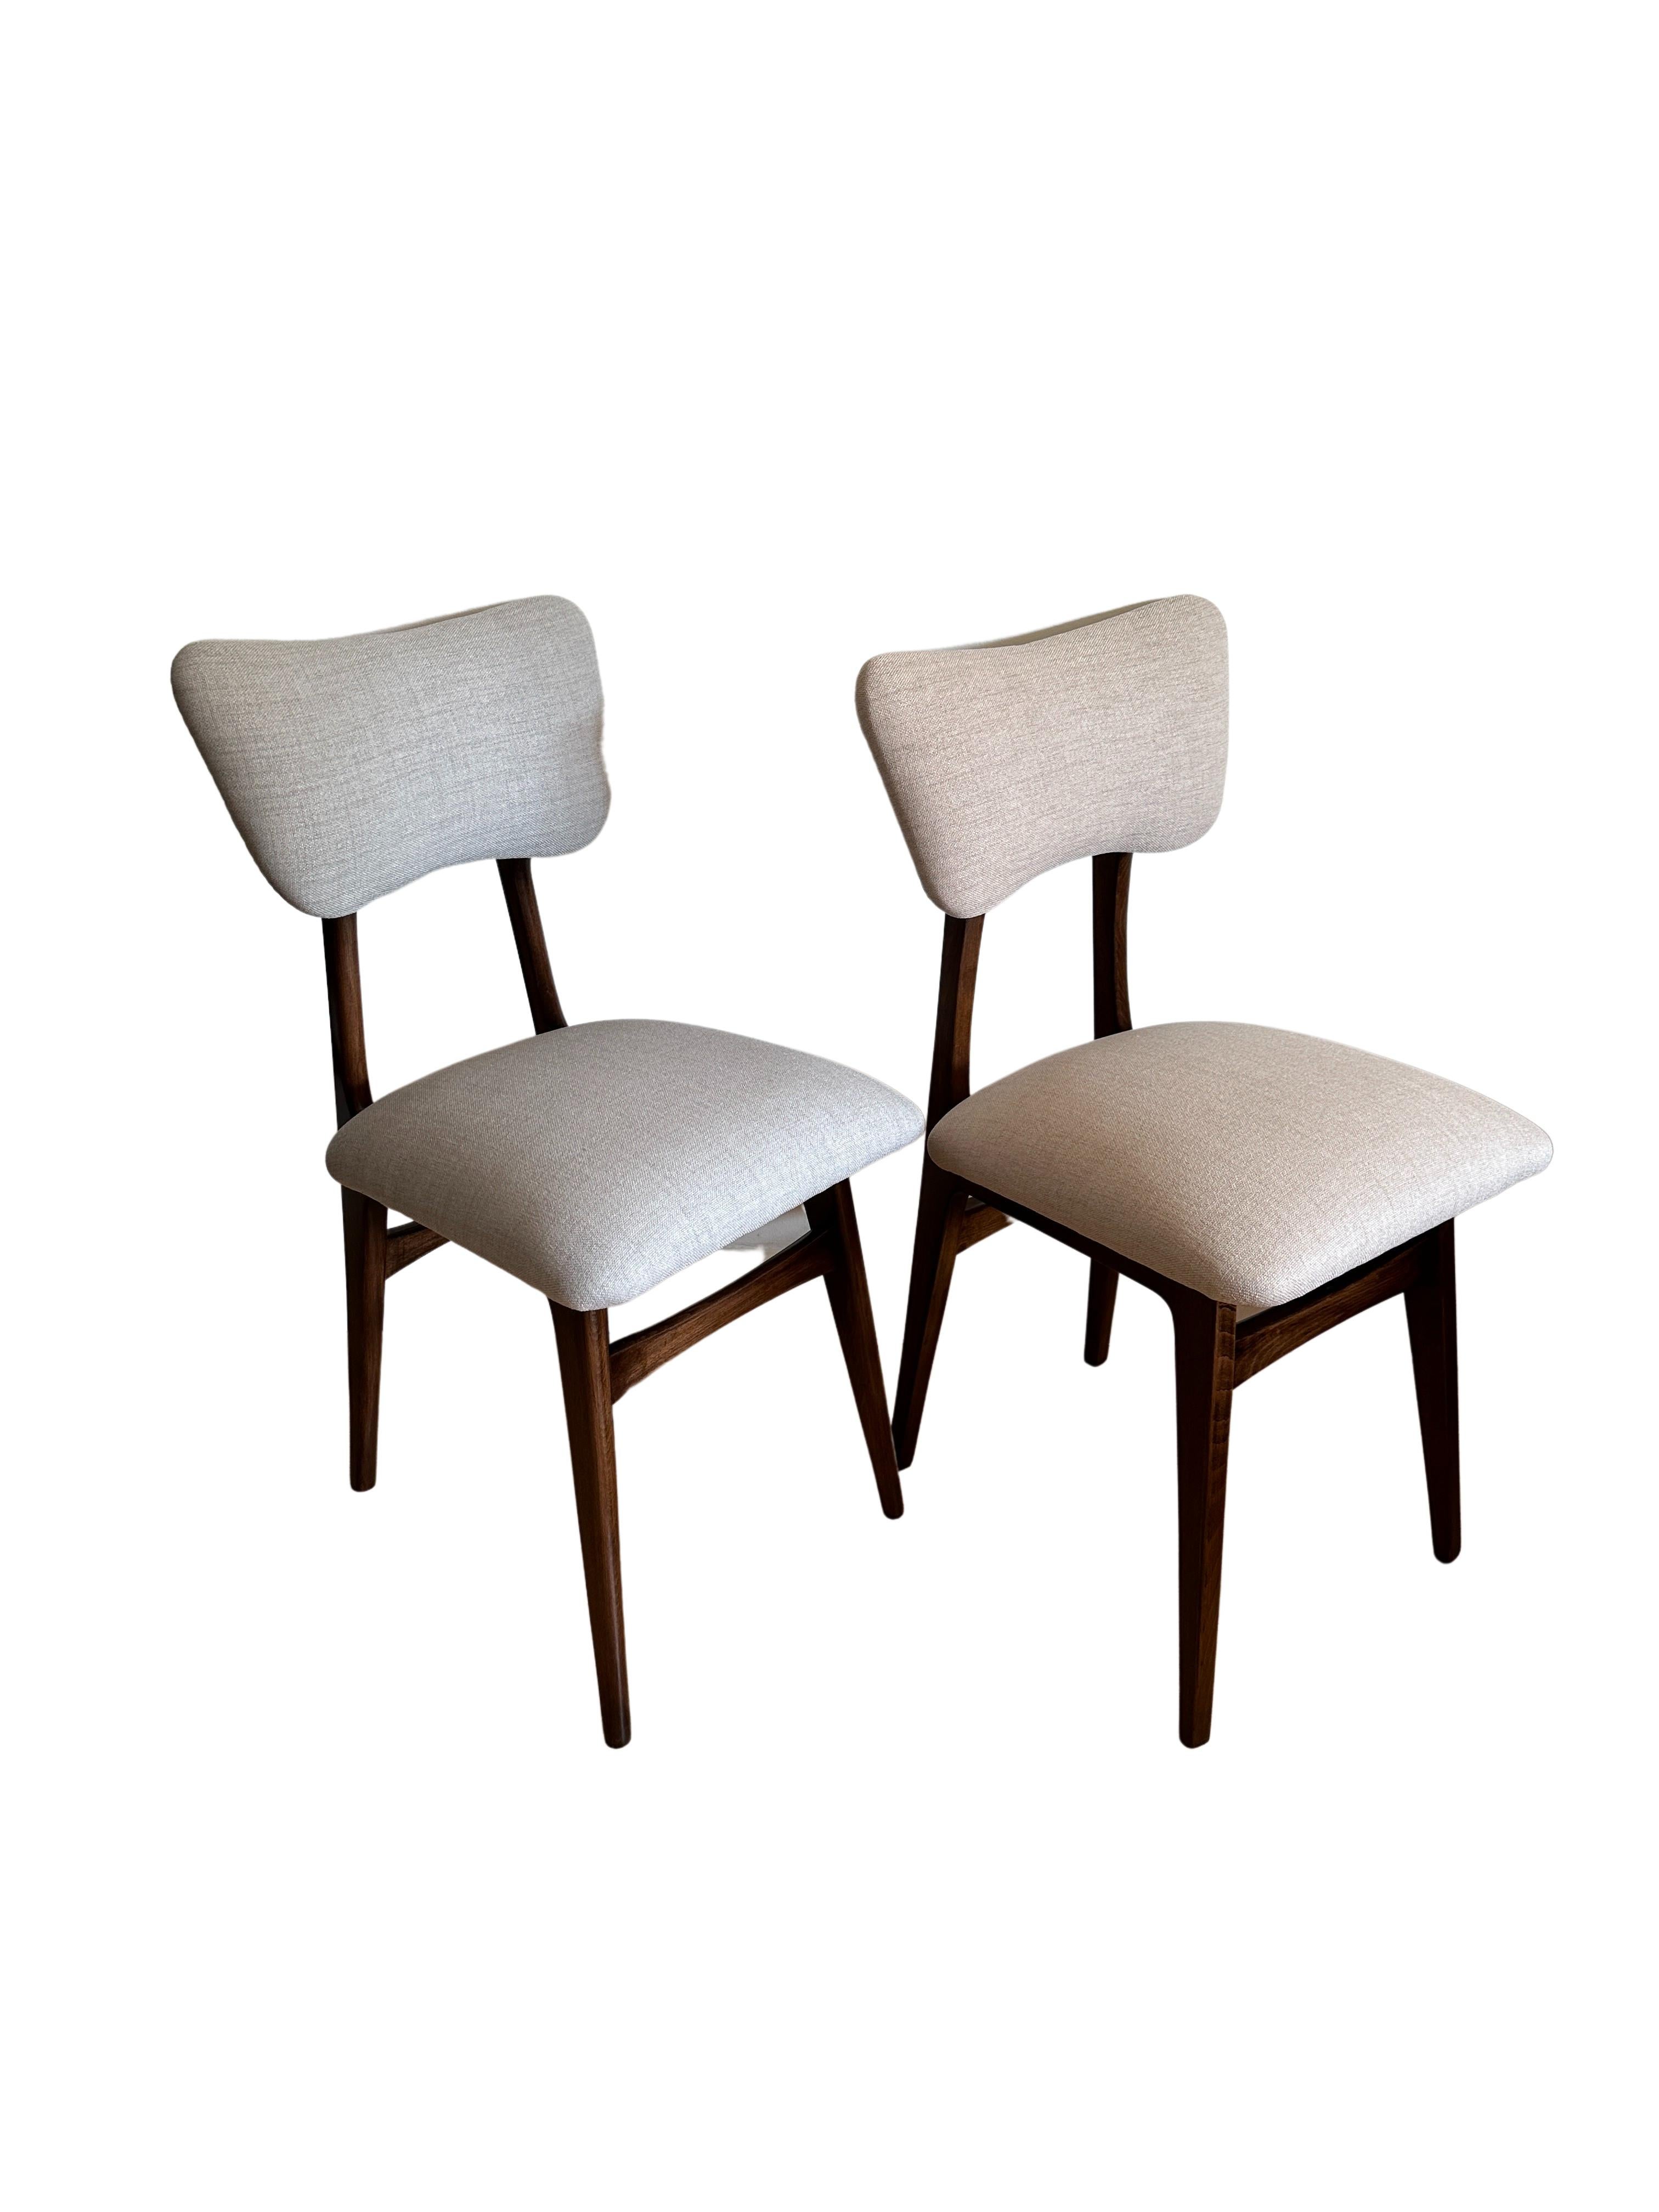 Unique set of six chairs manufactured in Poland in the 1960s, designed by Rajmund Halas. 

The upholstery is made of fabric with an interesting structure of thickly woven canvas, nice and soft to the touch. The fabric is covered with a protective